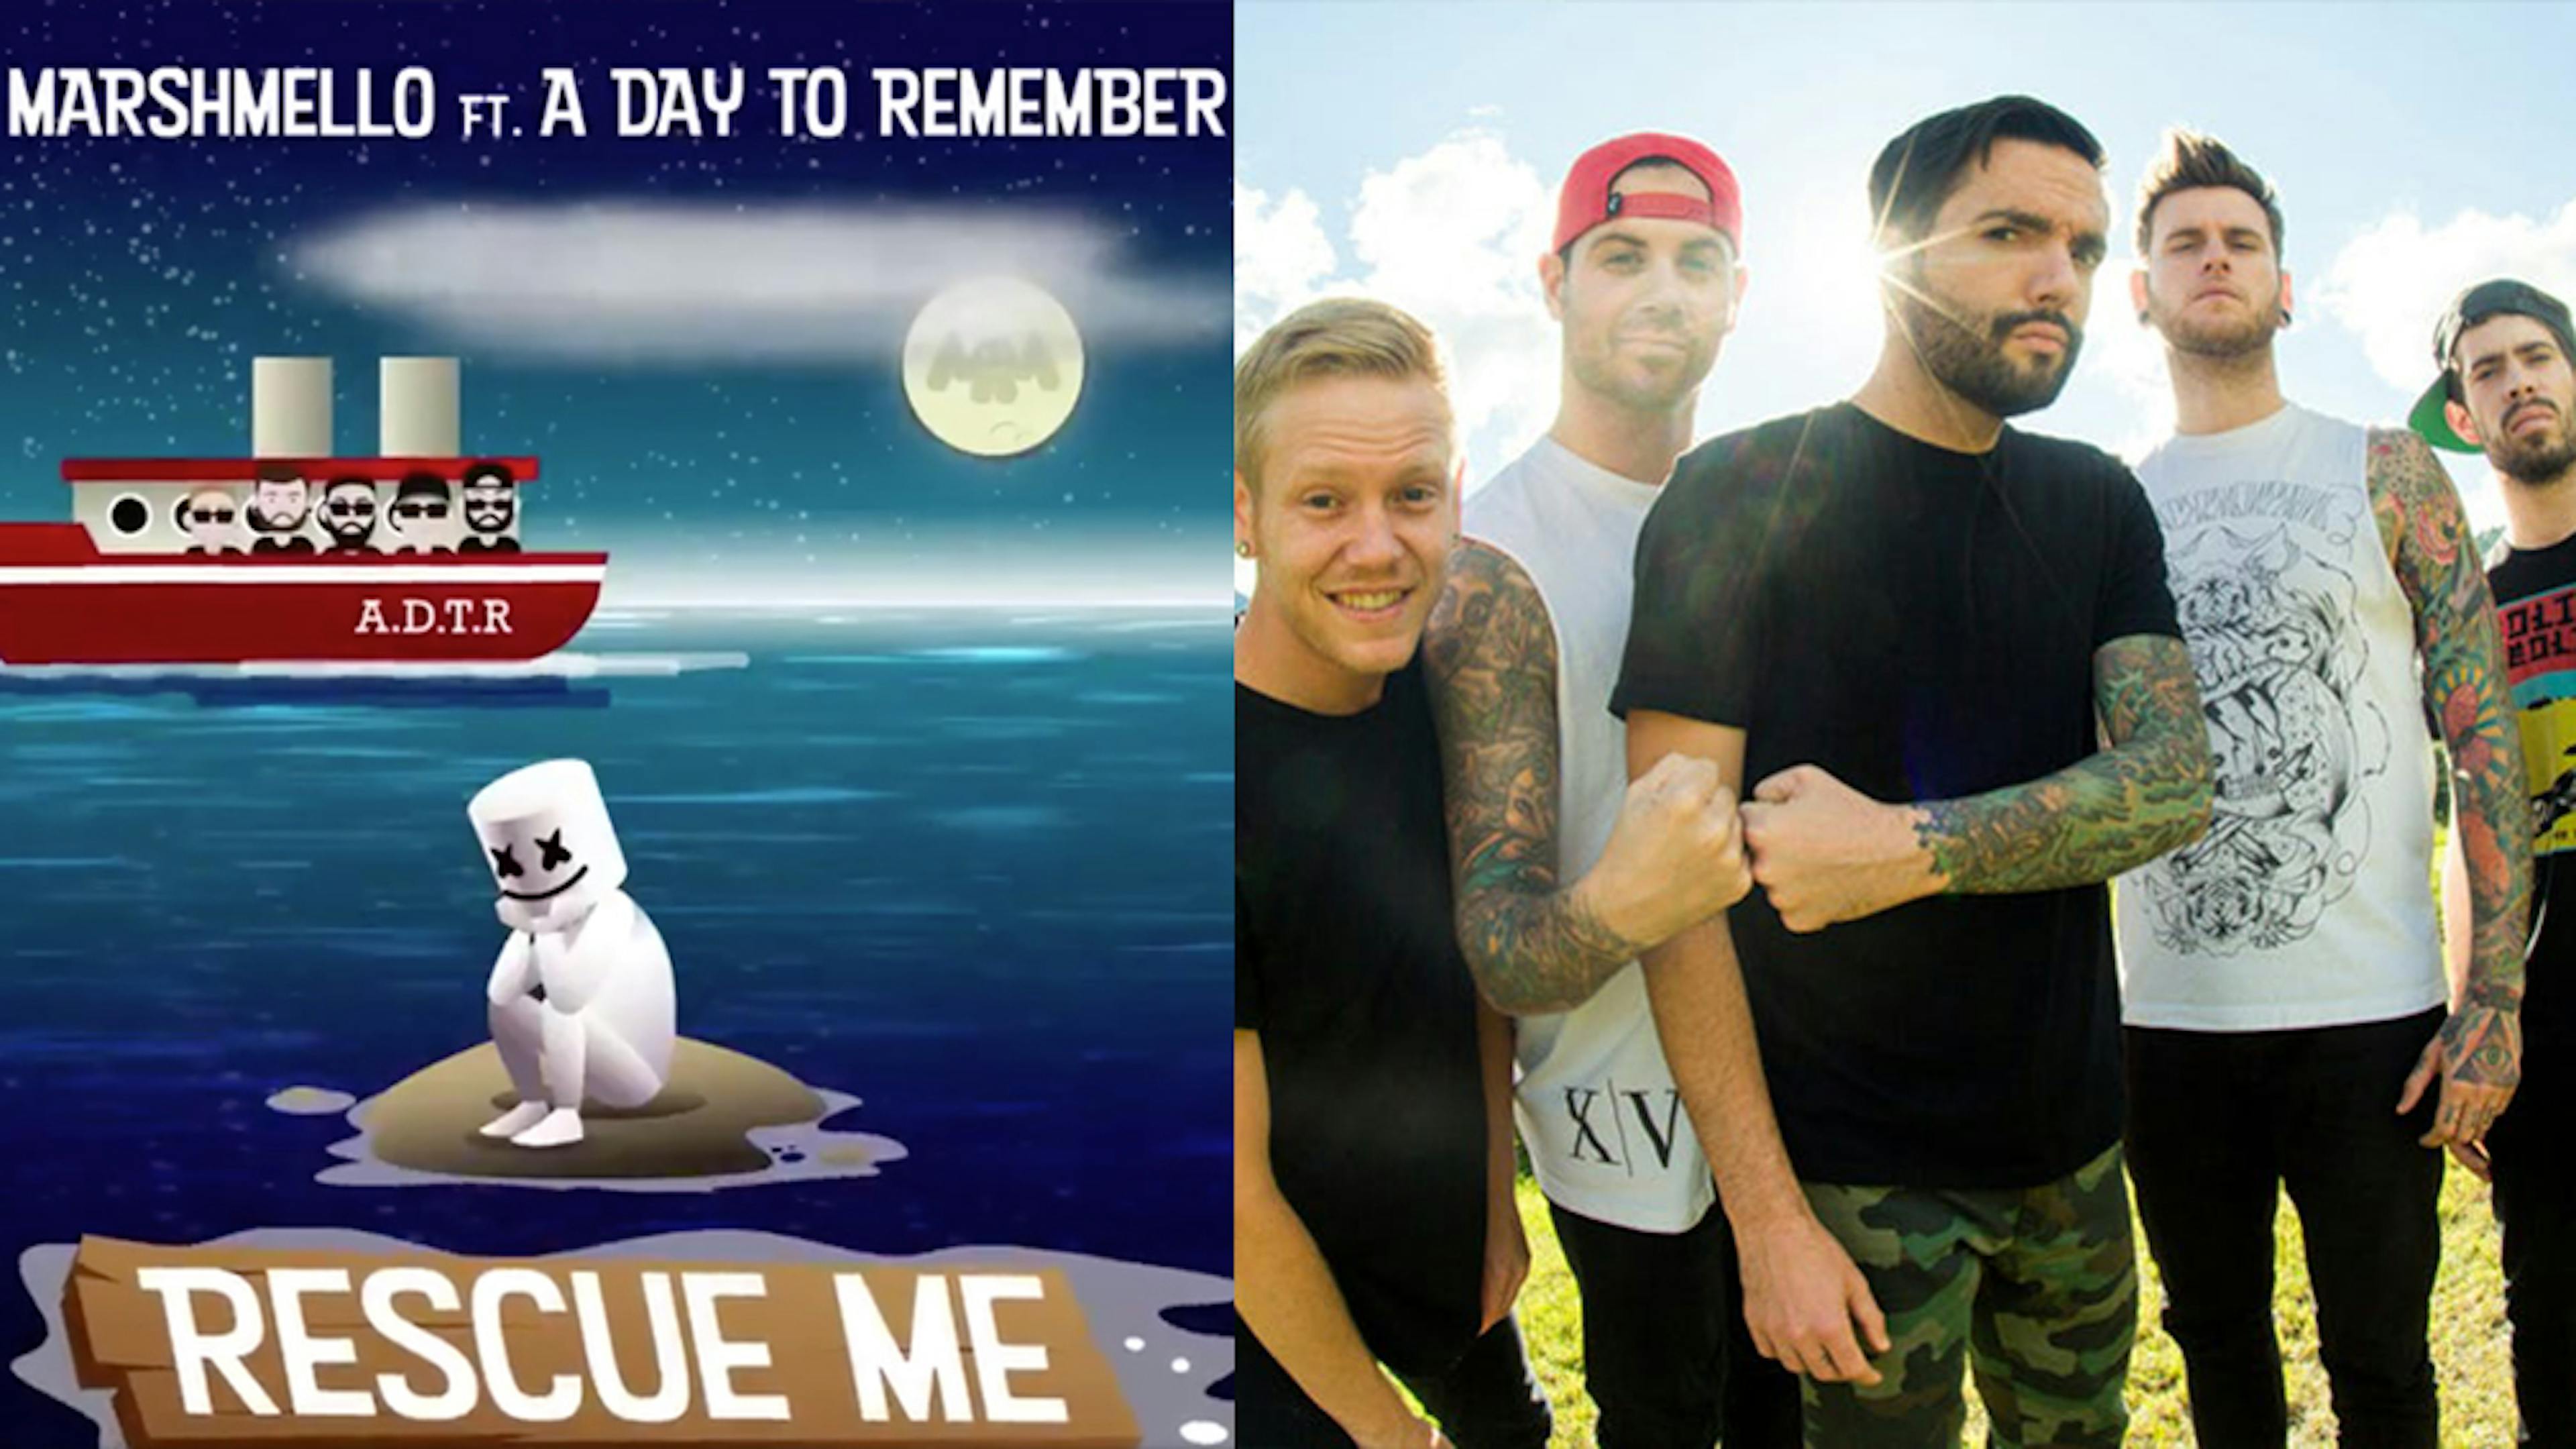 A Day To Remember And Marshmello Are Releasing A New Song Together This Week